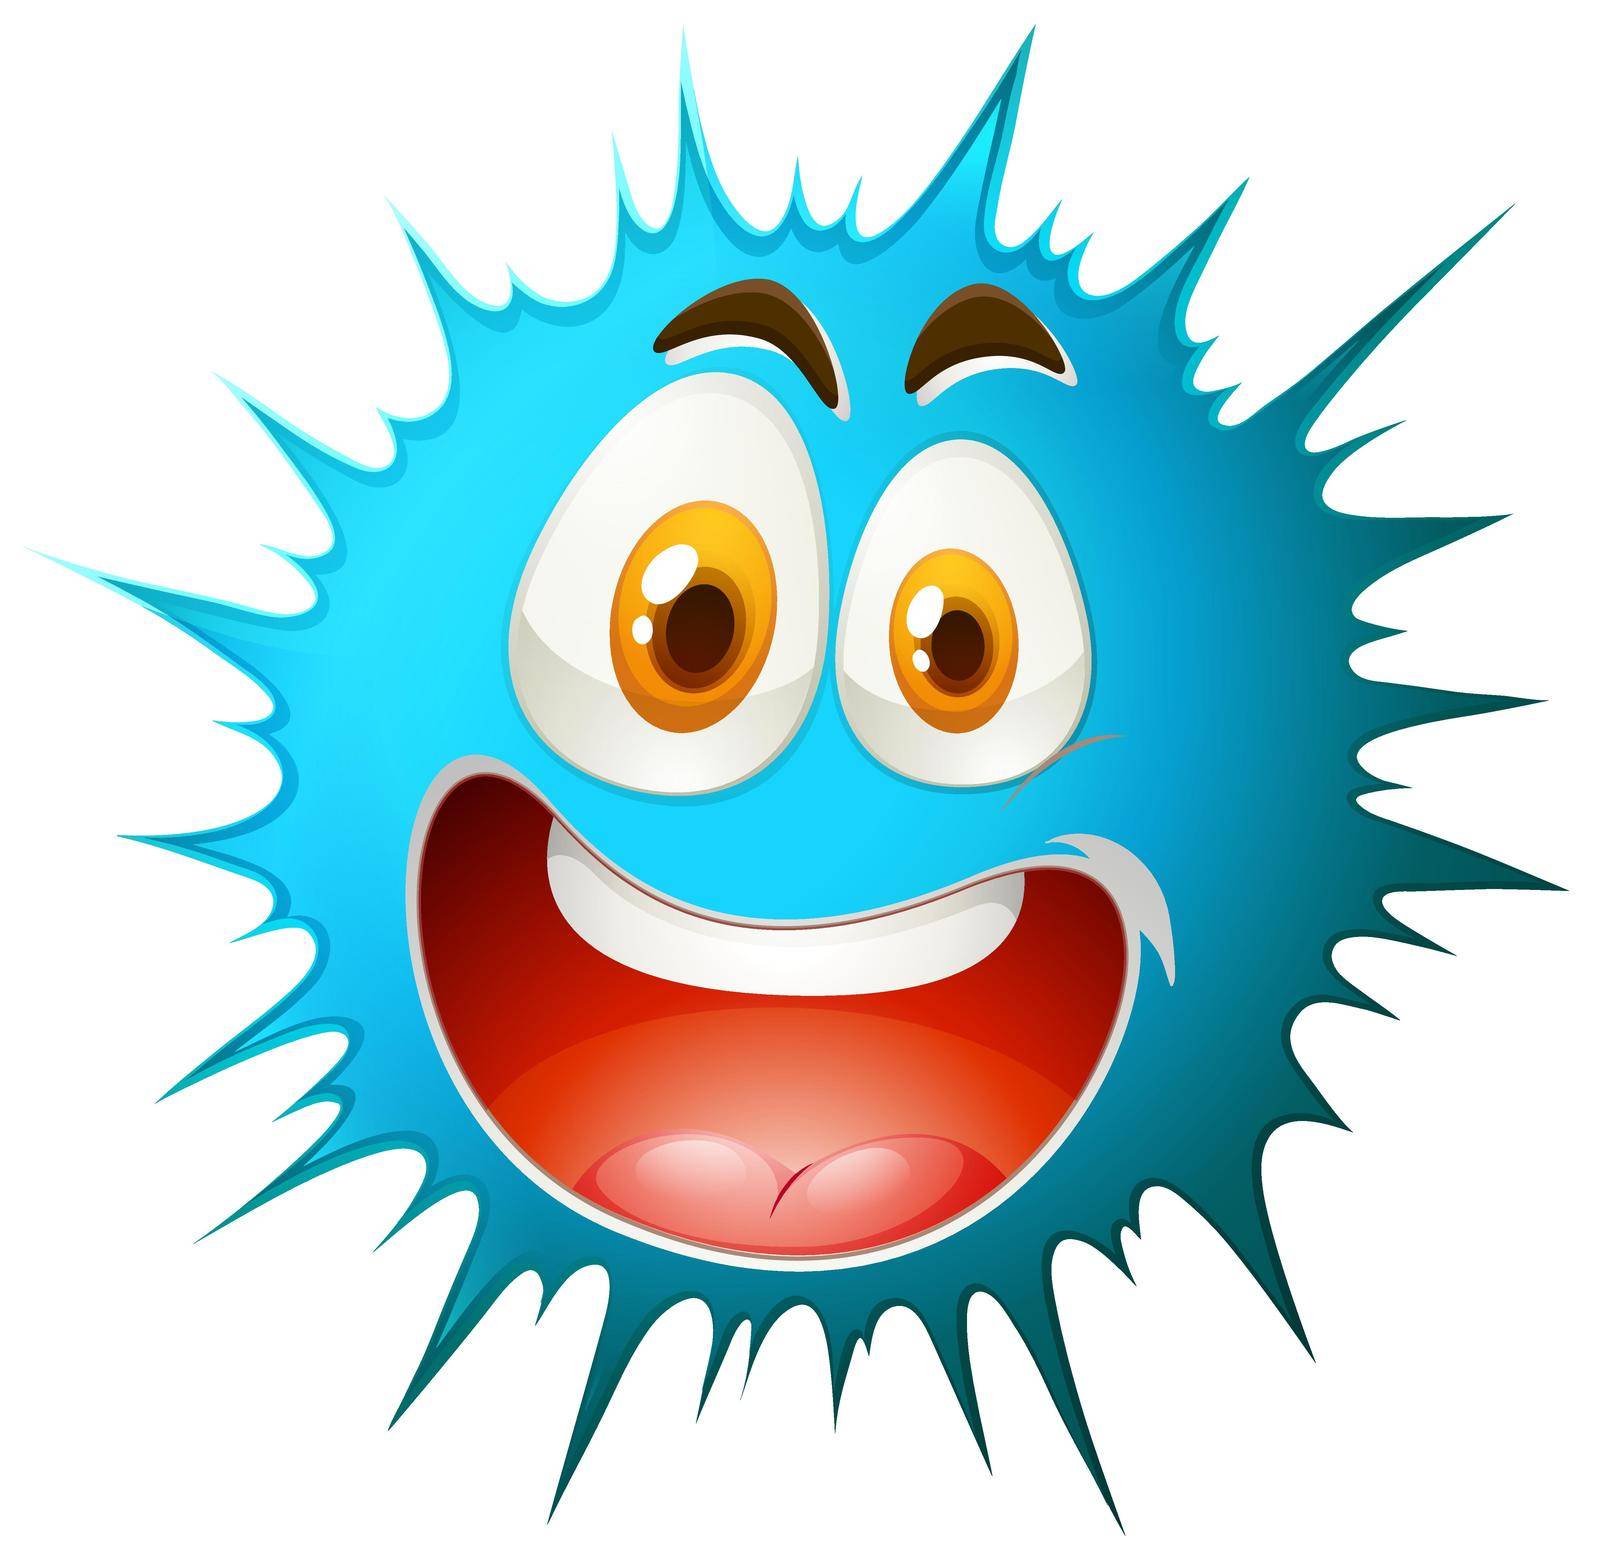 Blue splash with happy facial expression illustration